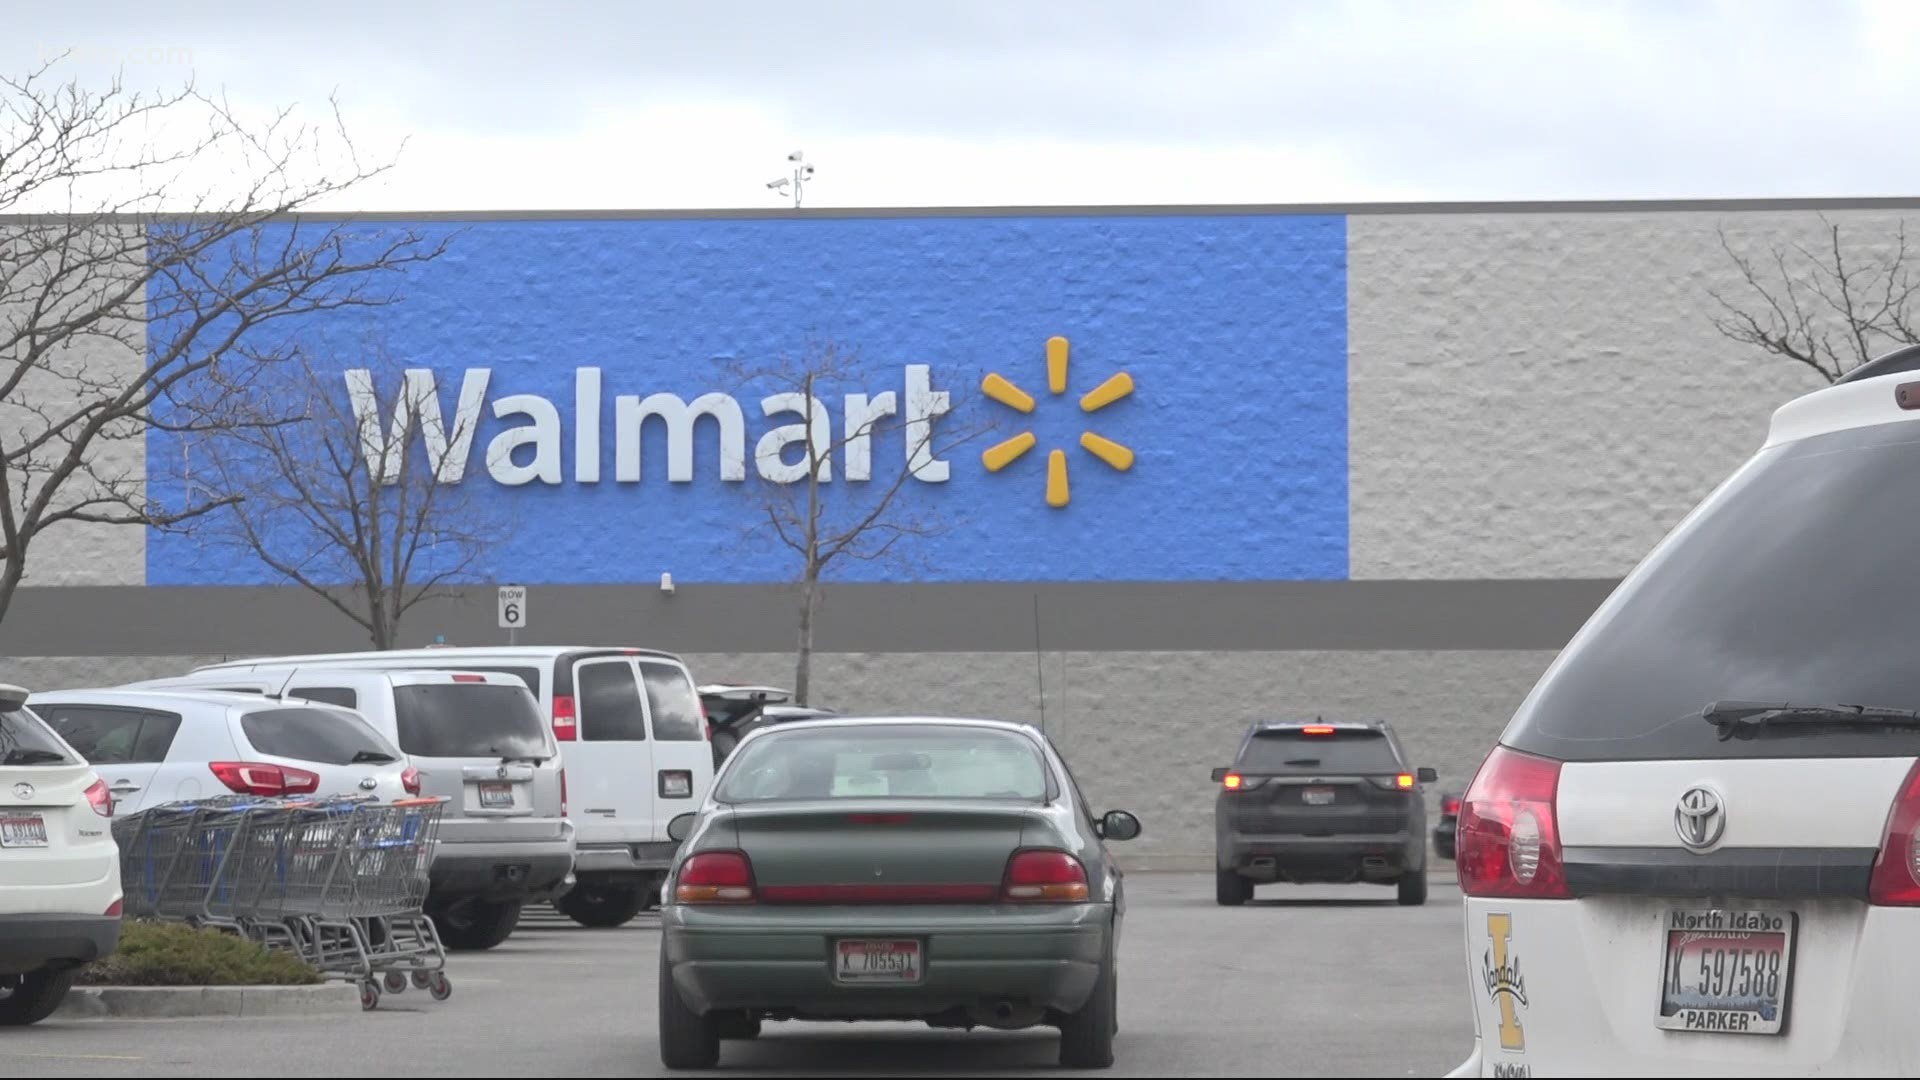 Police are asking for information from anyone who witnessed a driver strike and kill an elderly man in the Post Falls Walmart parking lot on Saturday, Feb. 27.